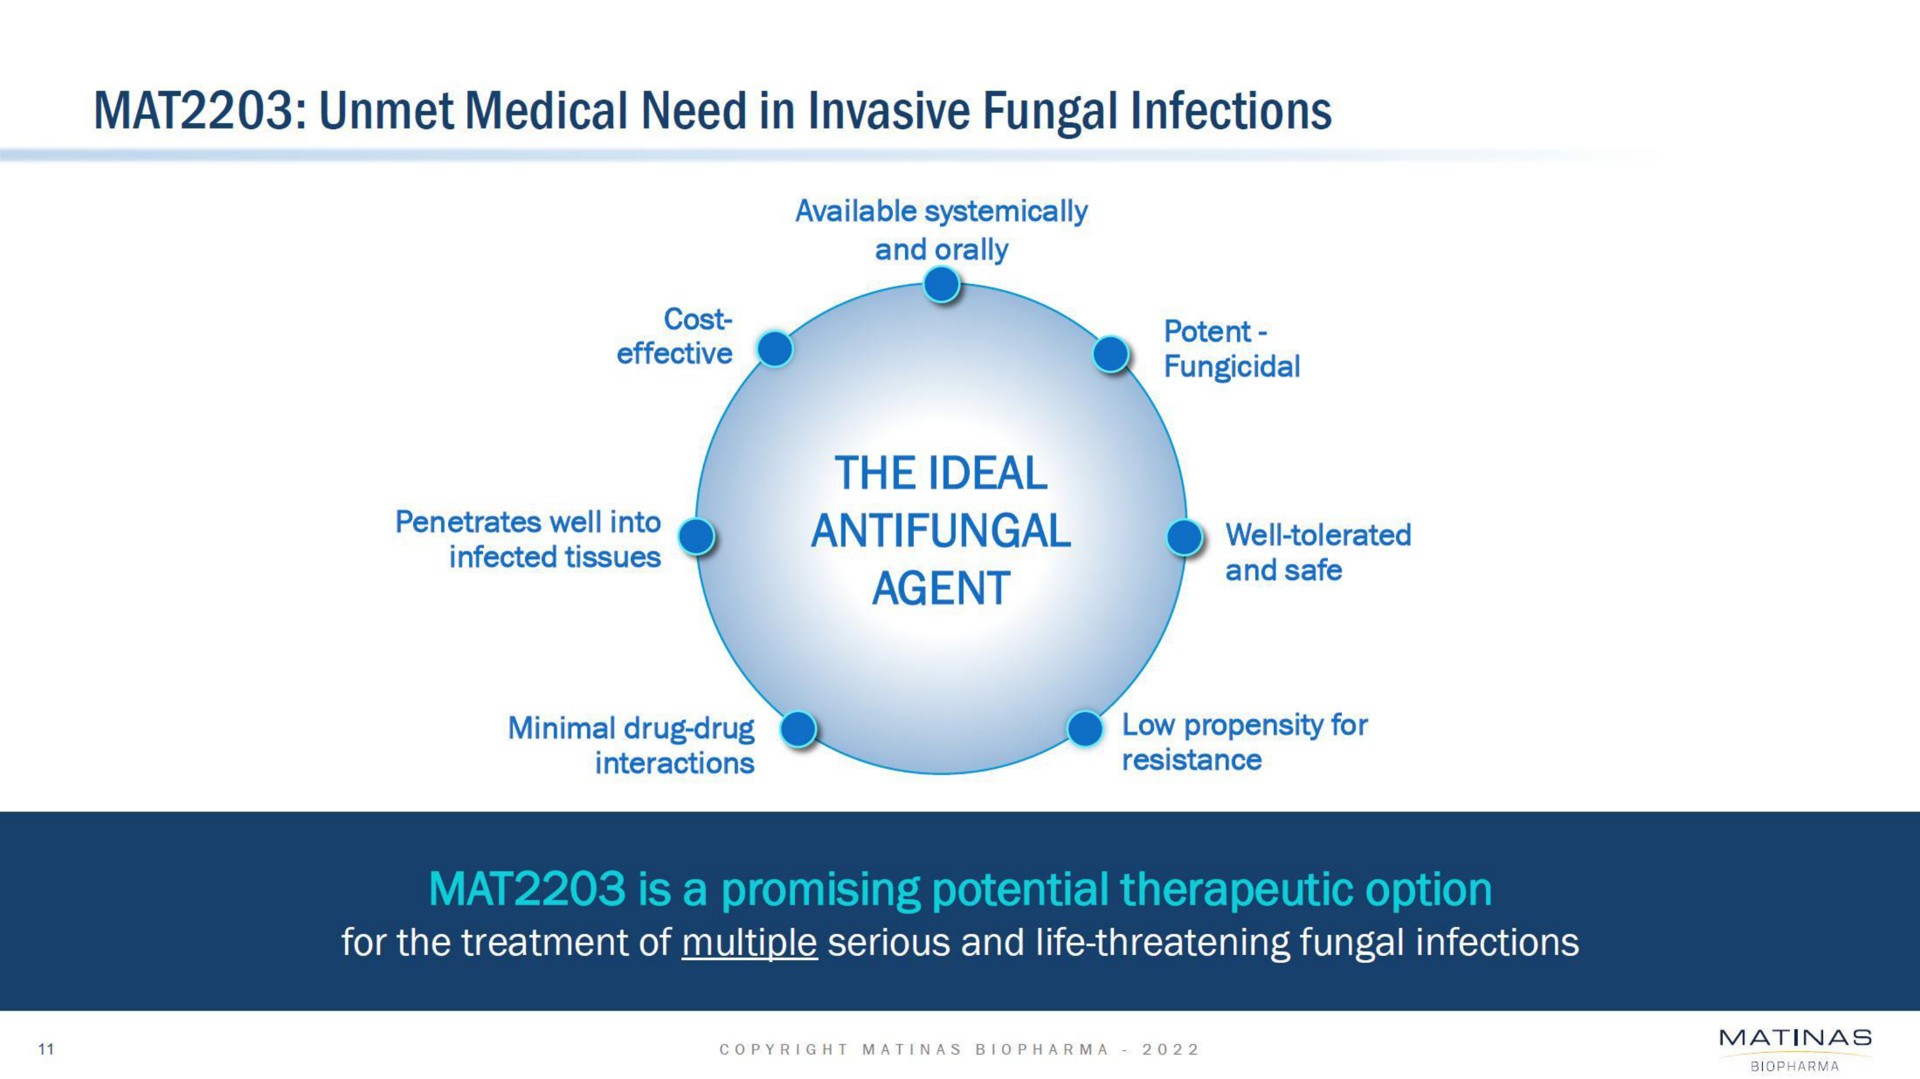 mat unmet medical need in invasive fungal infections | Matinas BioPharma